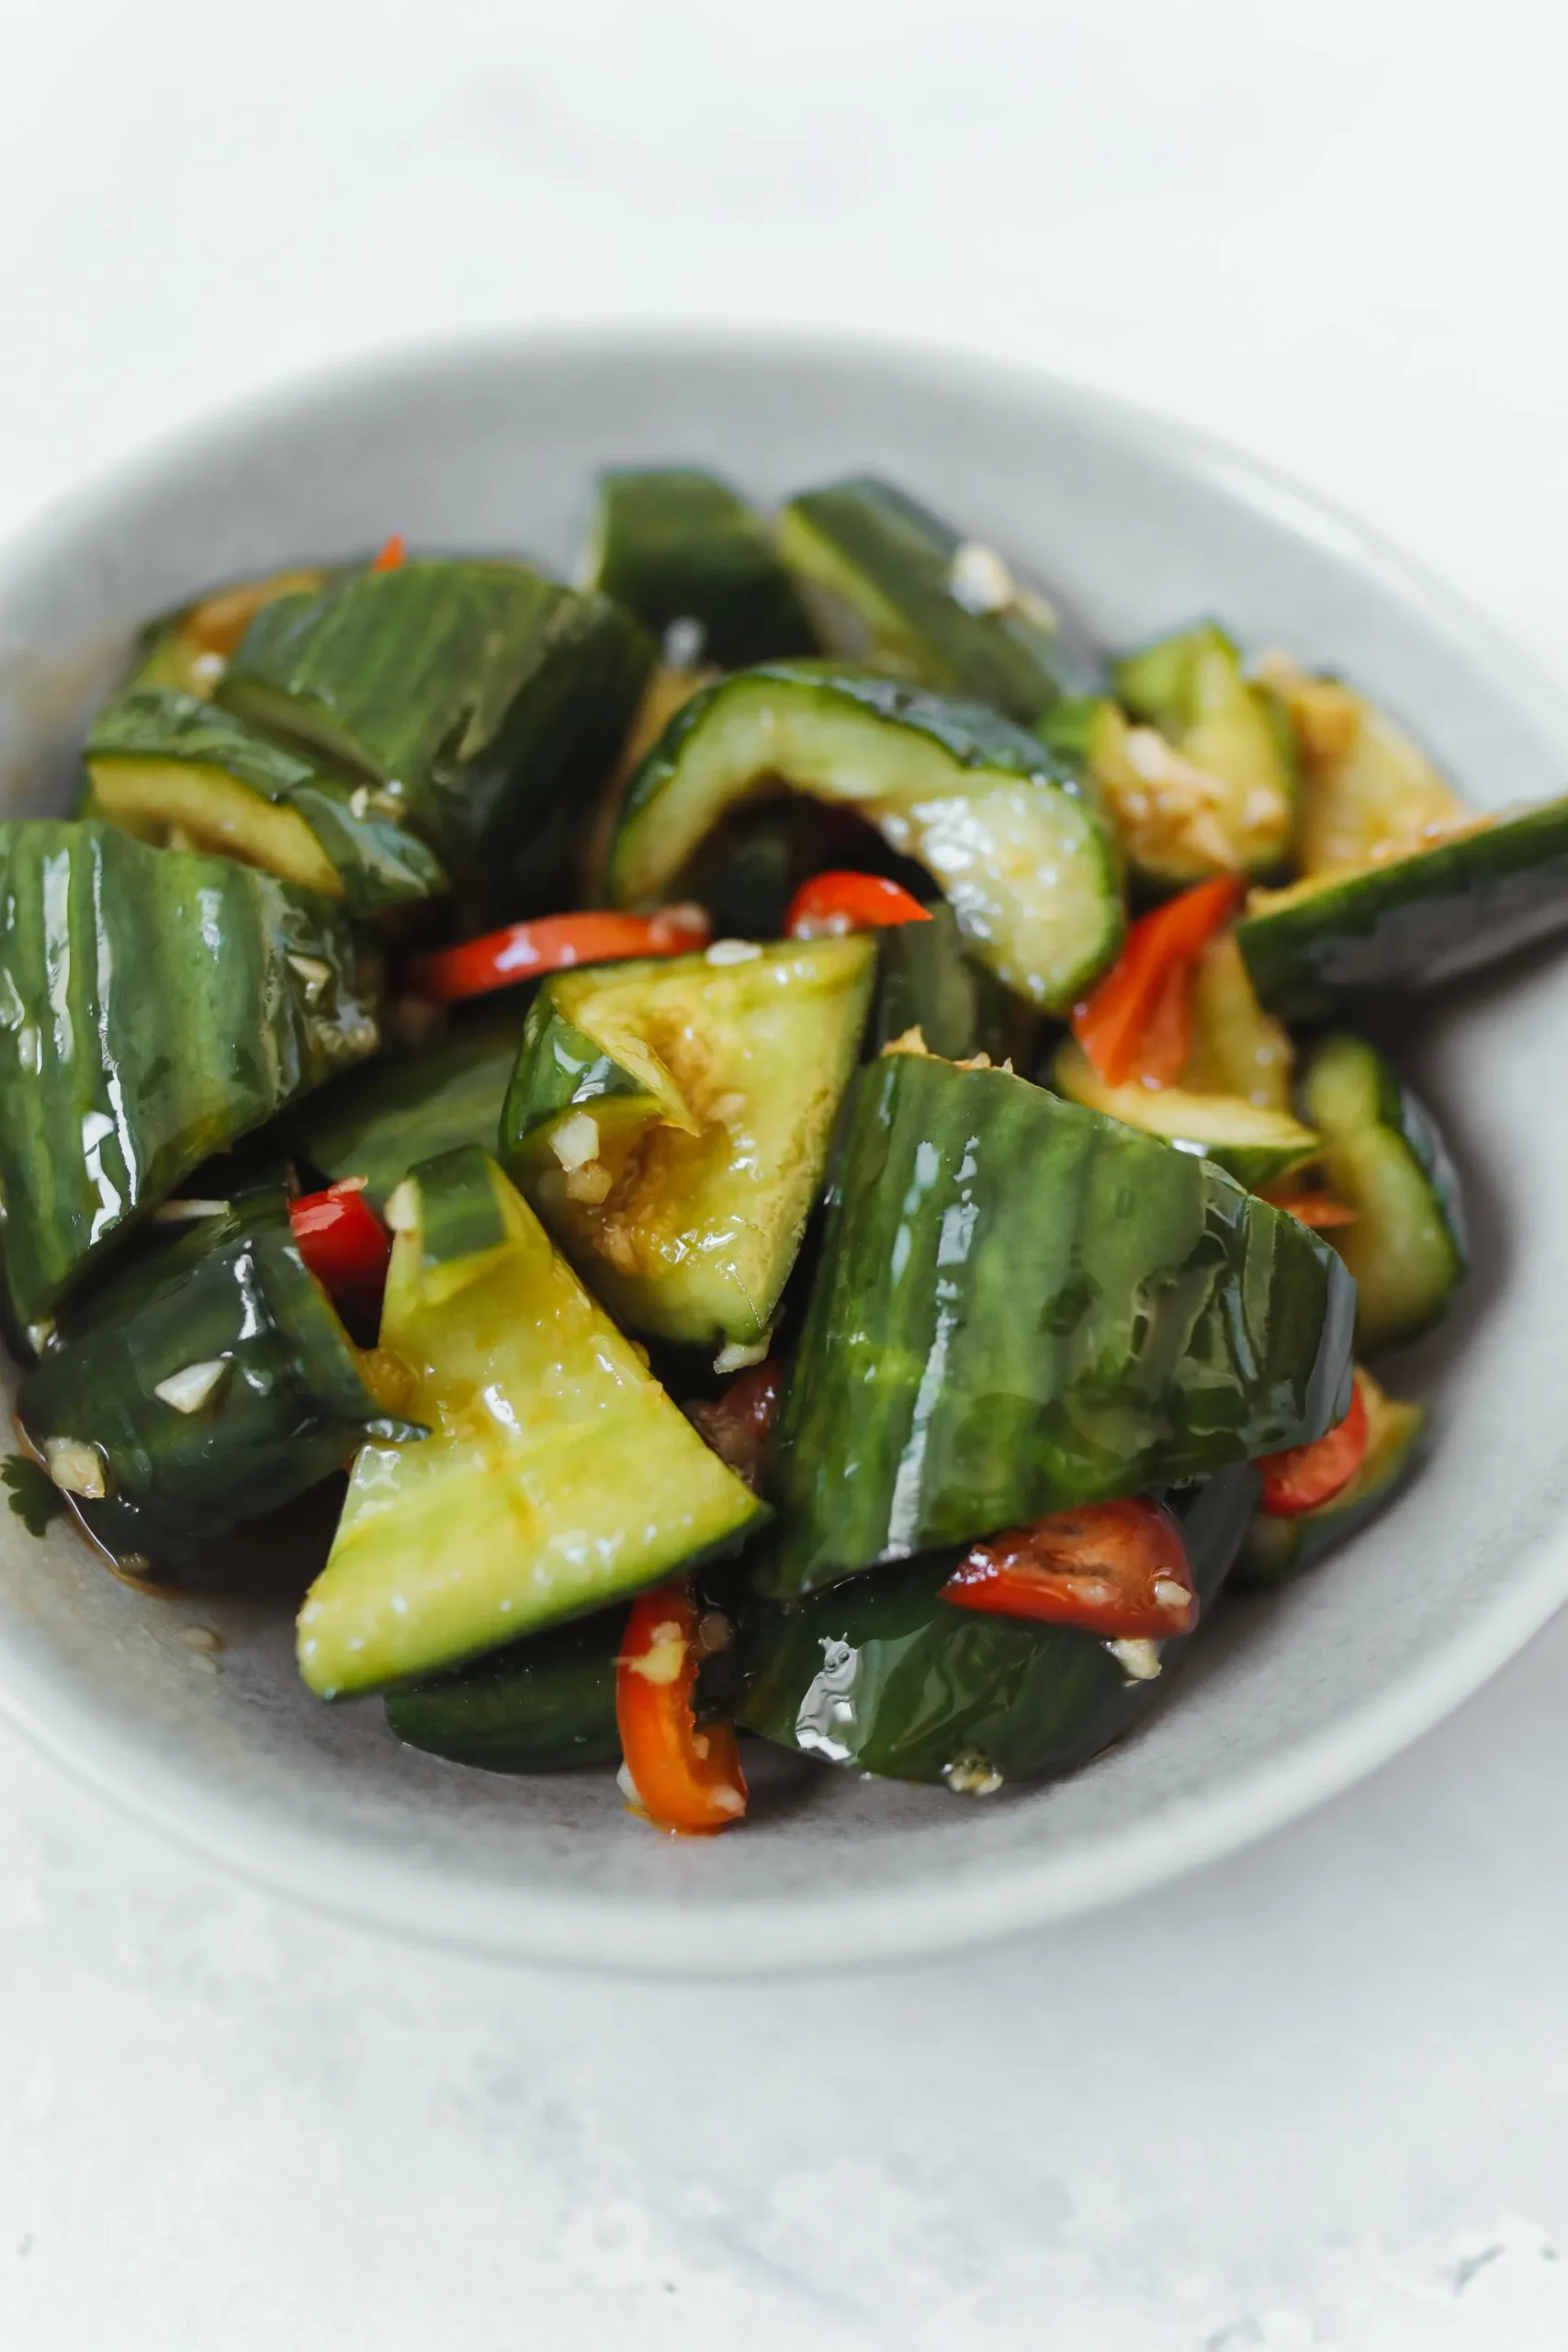 Delightful Din Tai Fung Cucumber Recipes: 4 Refreshing Recipes to Try